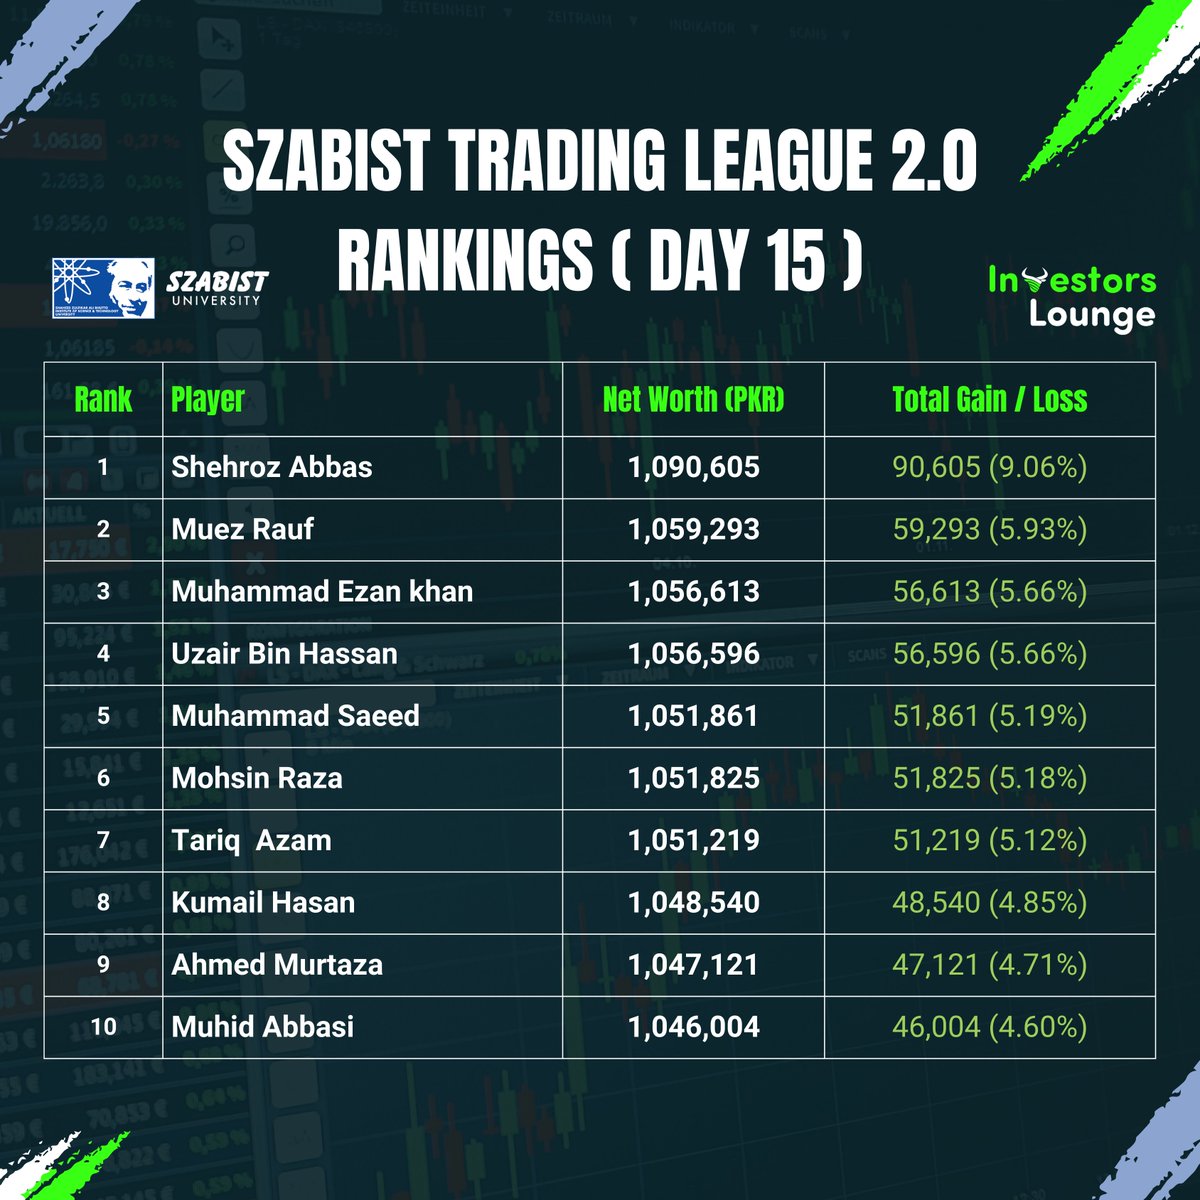 SZABIST Trading League 2.0 - Top 10 Rankings Day 15    

Shehroz Abbas is at the top of the leaderboard, with a net worth of 1,090,605 PKR and a total increase of 9.06%  

#KSE100 #tradingchamps #Investorslounge #tradingleague #SZABIST #PSX